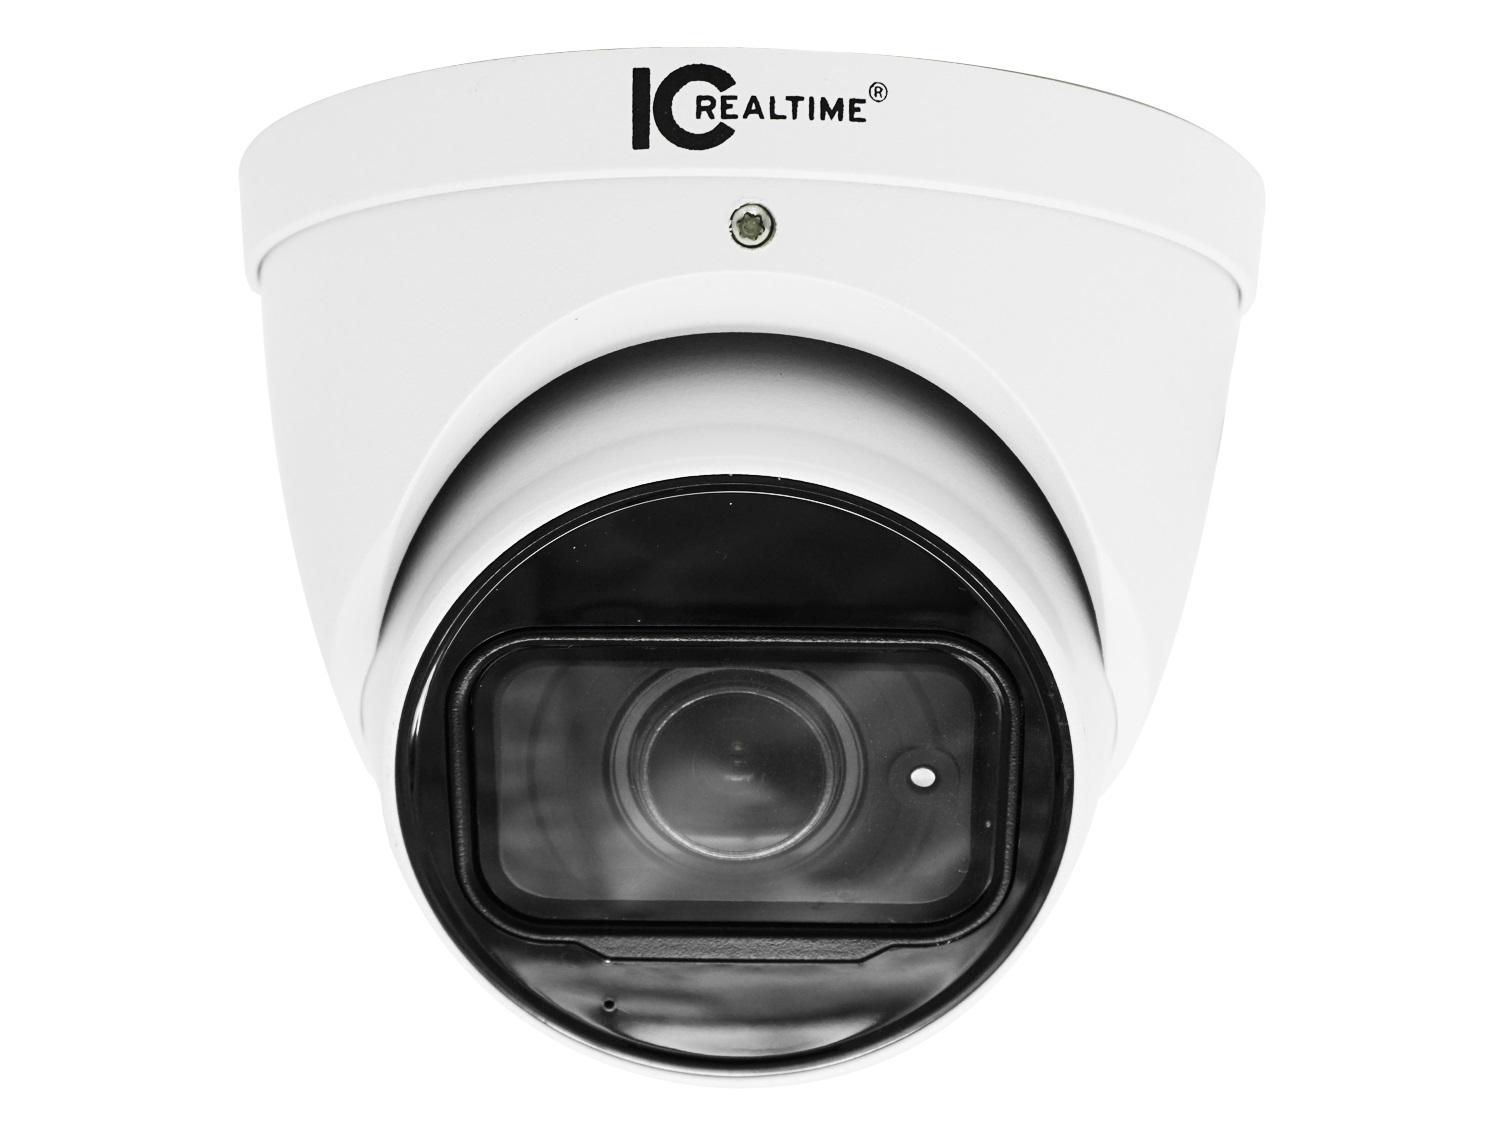 AVS-4KD8021-IR 8MP HD-AVS Indoor/Outdoor Mid Size Eyeball Dome Camera/2.8mm Lens/164ft Smart IR/Built-in Mic/12VDC by ICRealtime